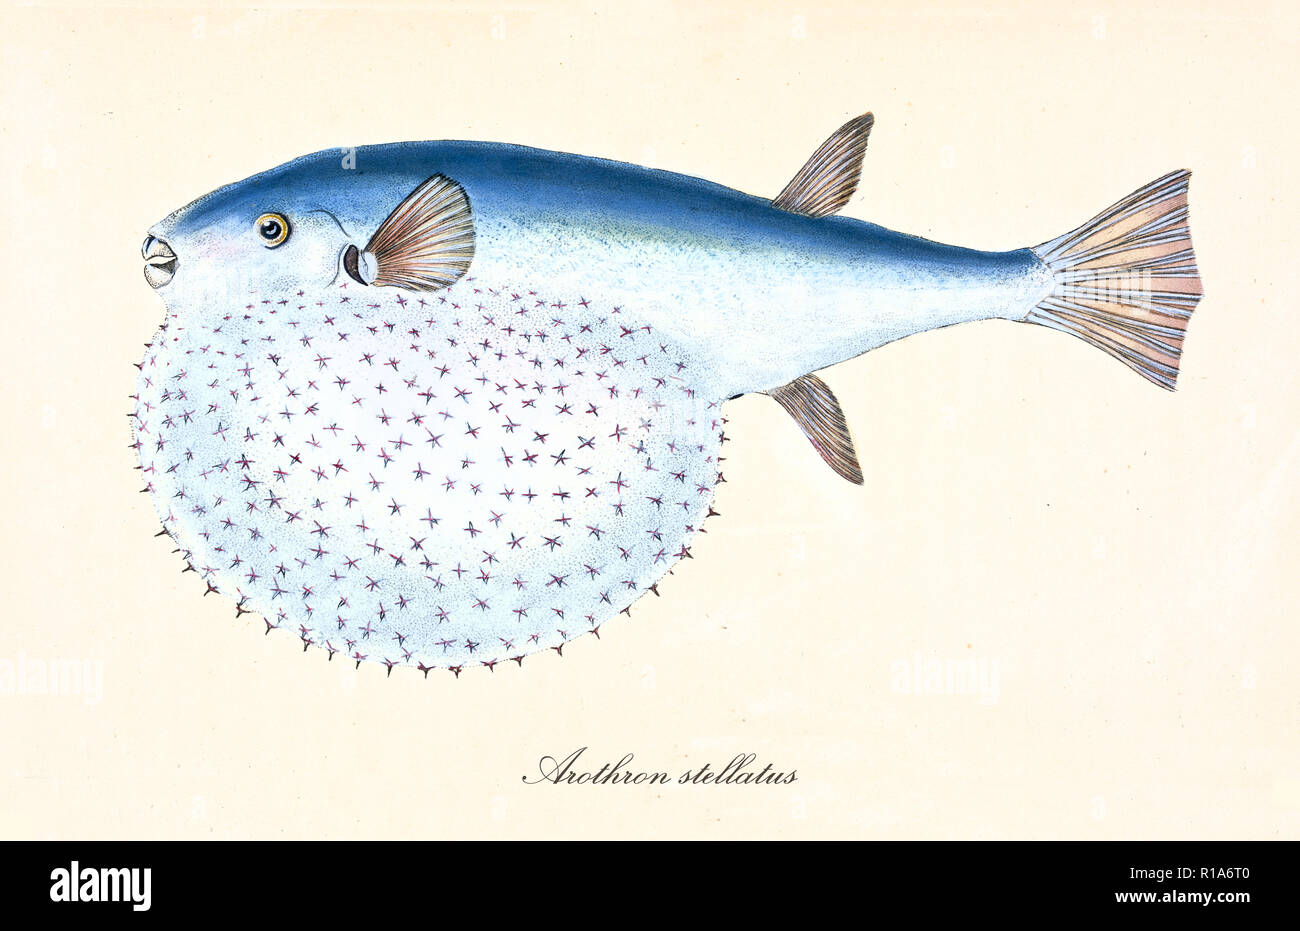 Ancient colorful illustration Stellate Puffer (Arothron stellatus), side view of the long fish swelling its throat, isolated element on white background. By Edward Donovan. London 1802 Stock Photo